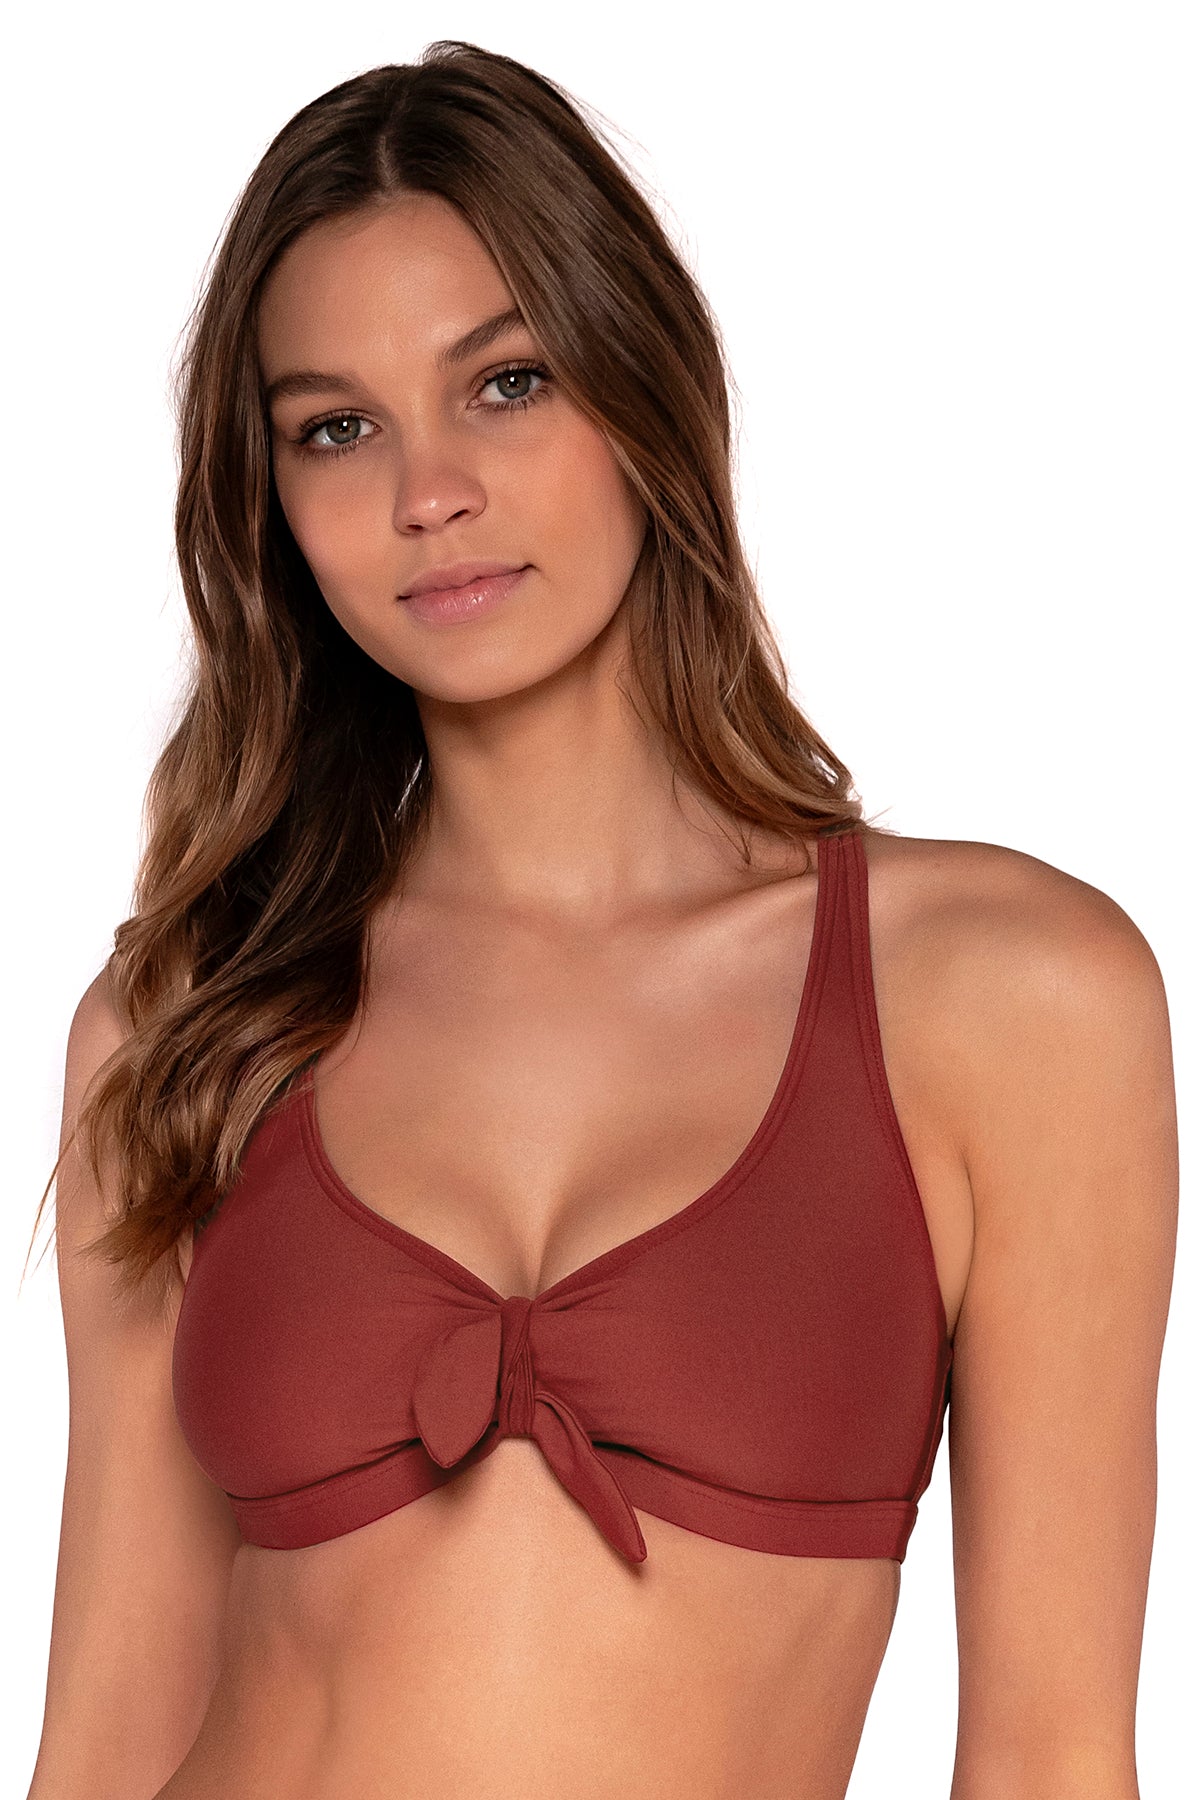 Front view of Sunsets Tuscan Red Brandi Bralette bikini top showing bralette front tie